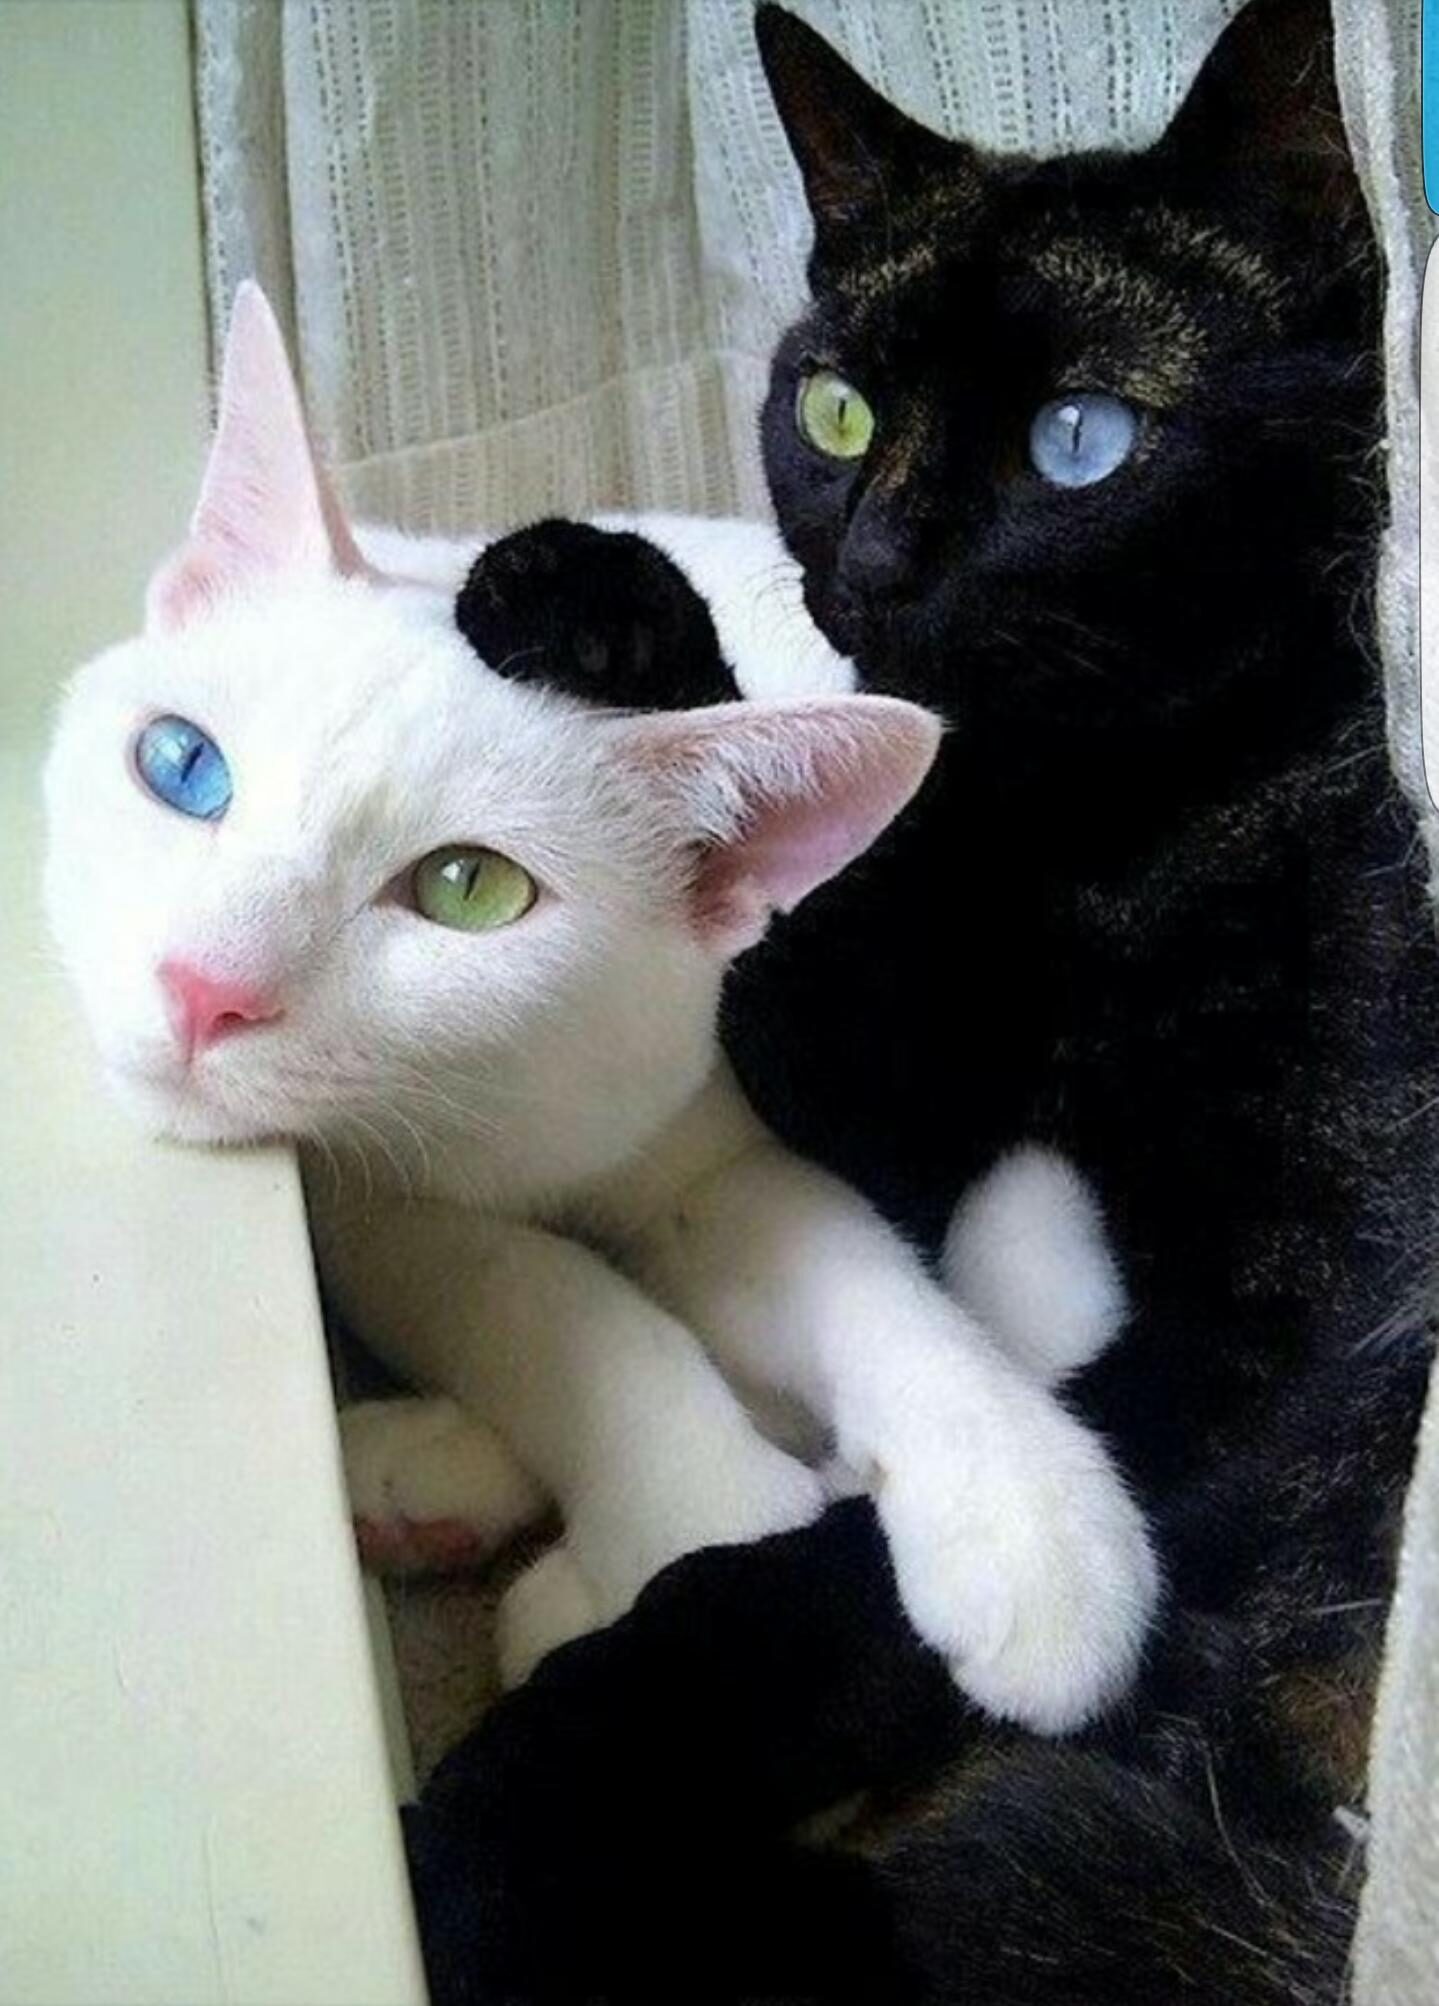 Two cats, one pure white, the other pure black. Each cat has one green eye and one blue eye.